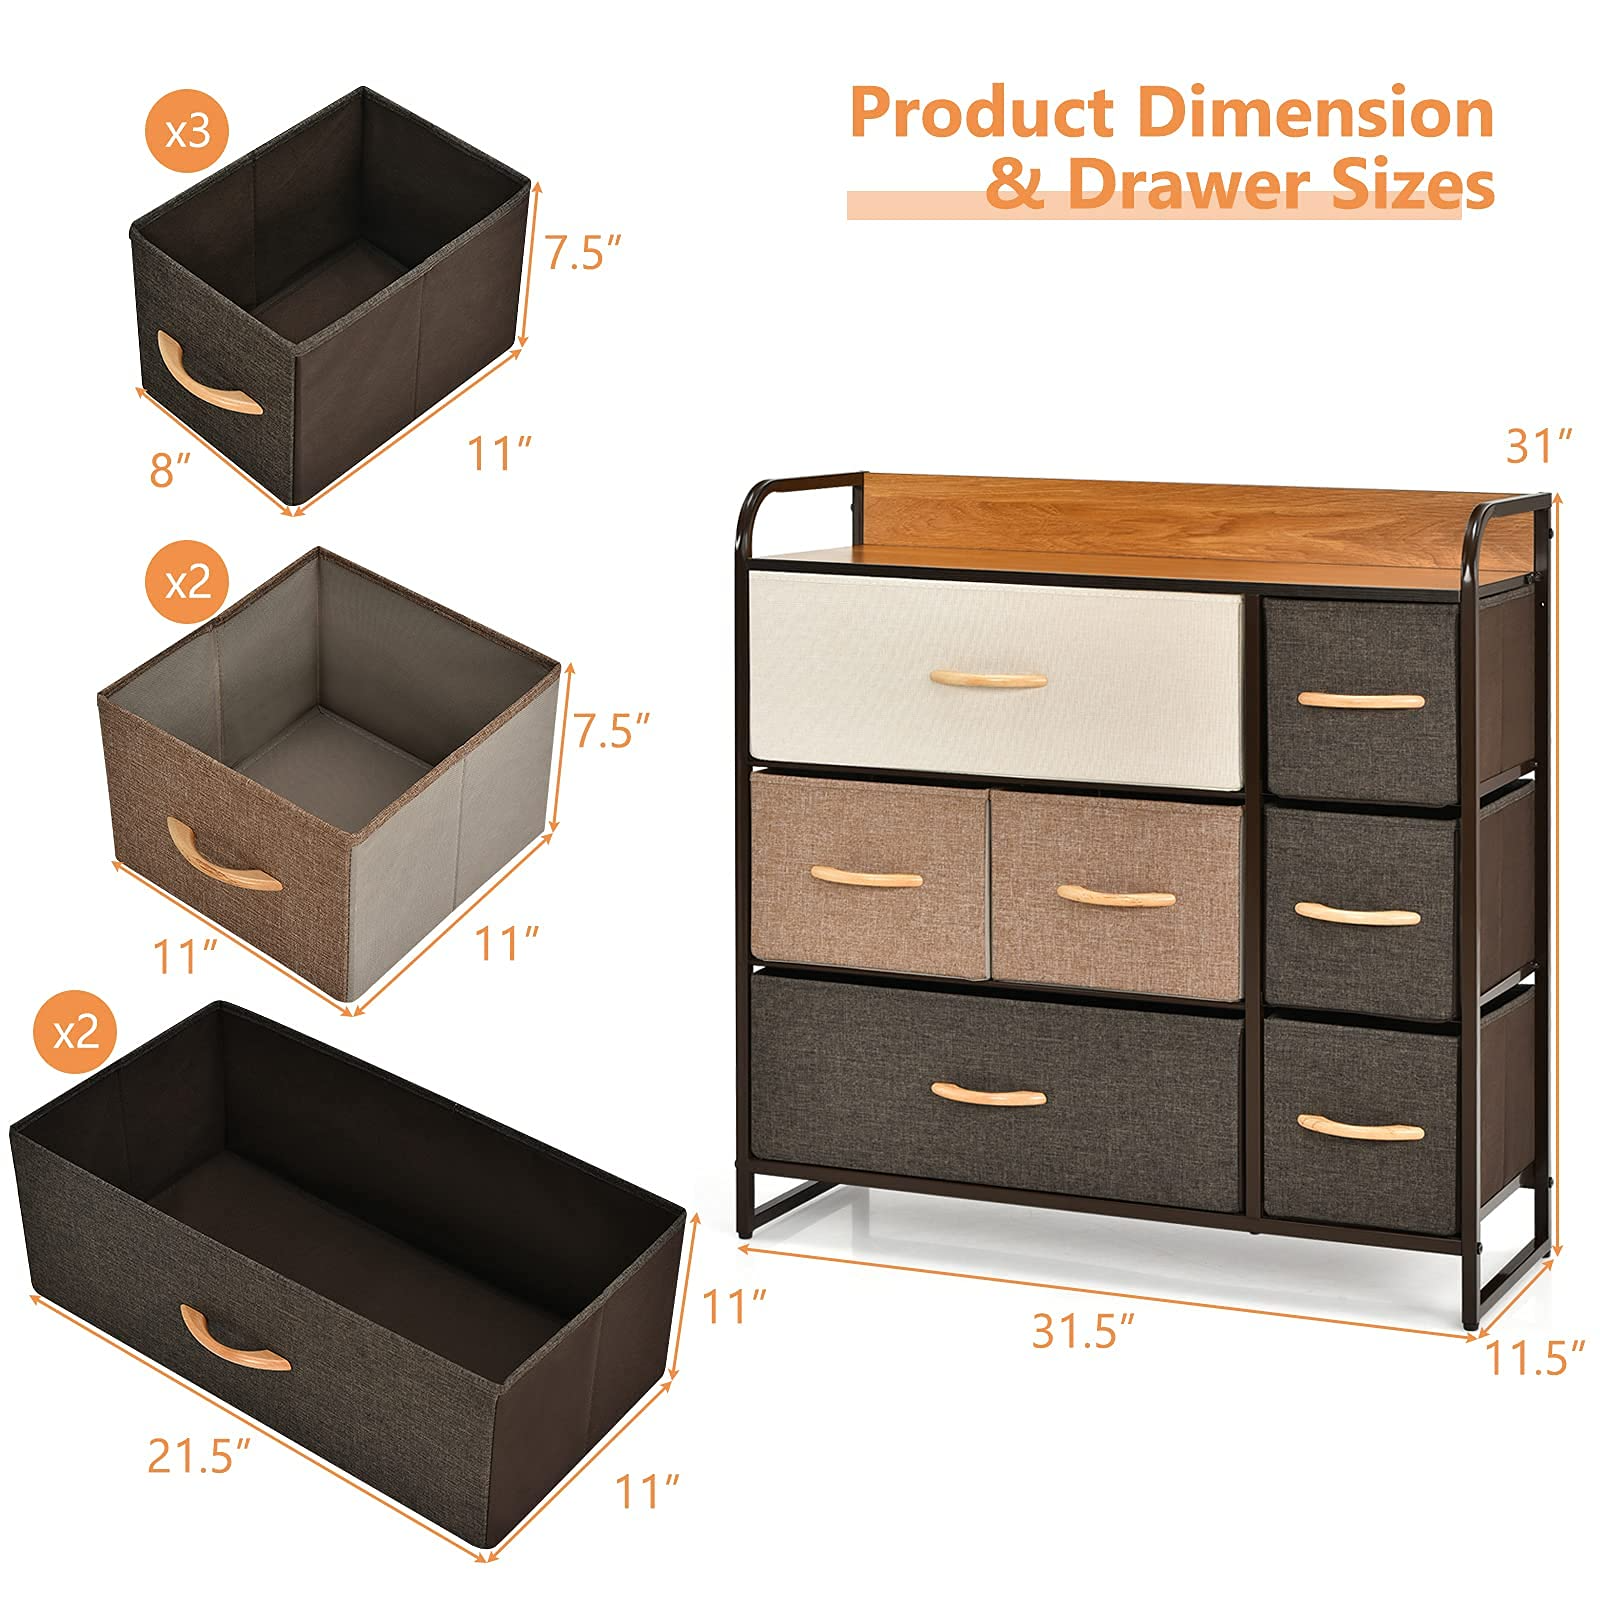 Giantex 7 Drawer Dresser Storage Tower with Fold-able Fabric Drawers